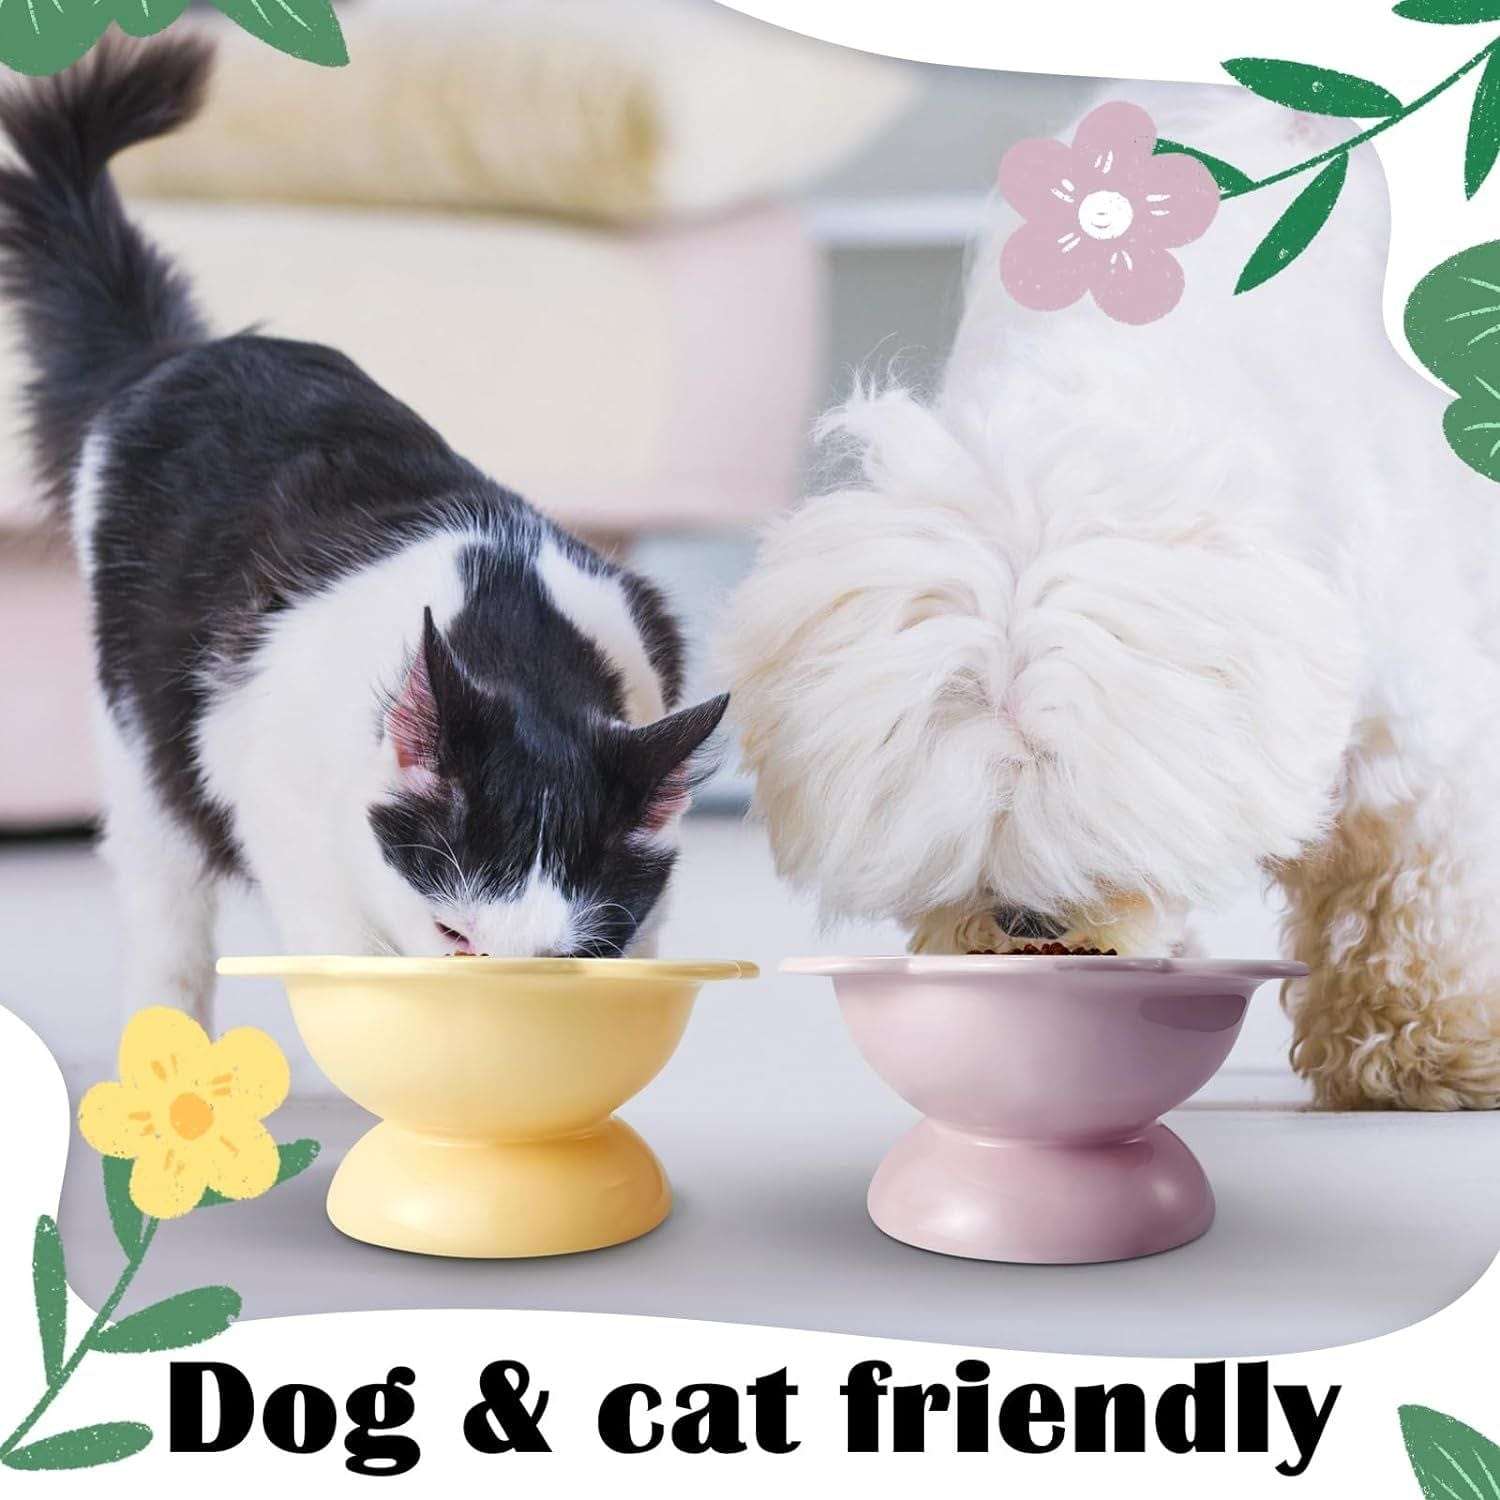 KUTKUT 2Pcs Ceramic Raised Cat Food Bowl, Tilted Flower Shaped Food or Water Bowl for Cats and Small Dogs, Anti Vomiting Pet Feeder Dish Whisker Fatigue Cat Bowl (Capacity: 200ML) - kutkutsty